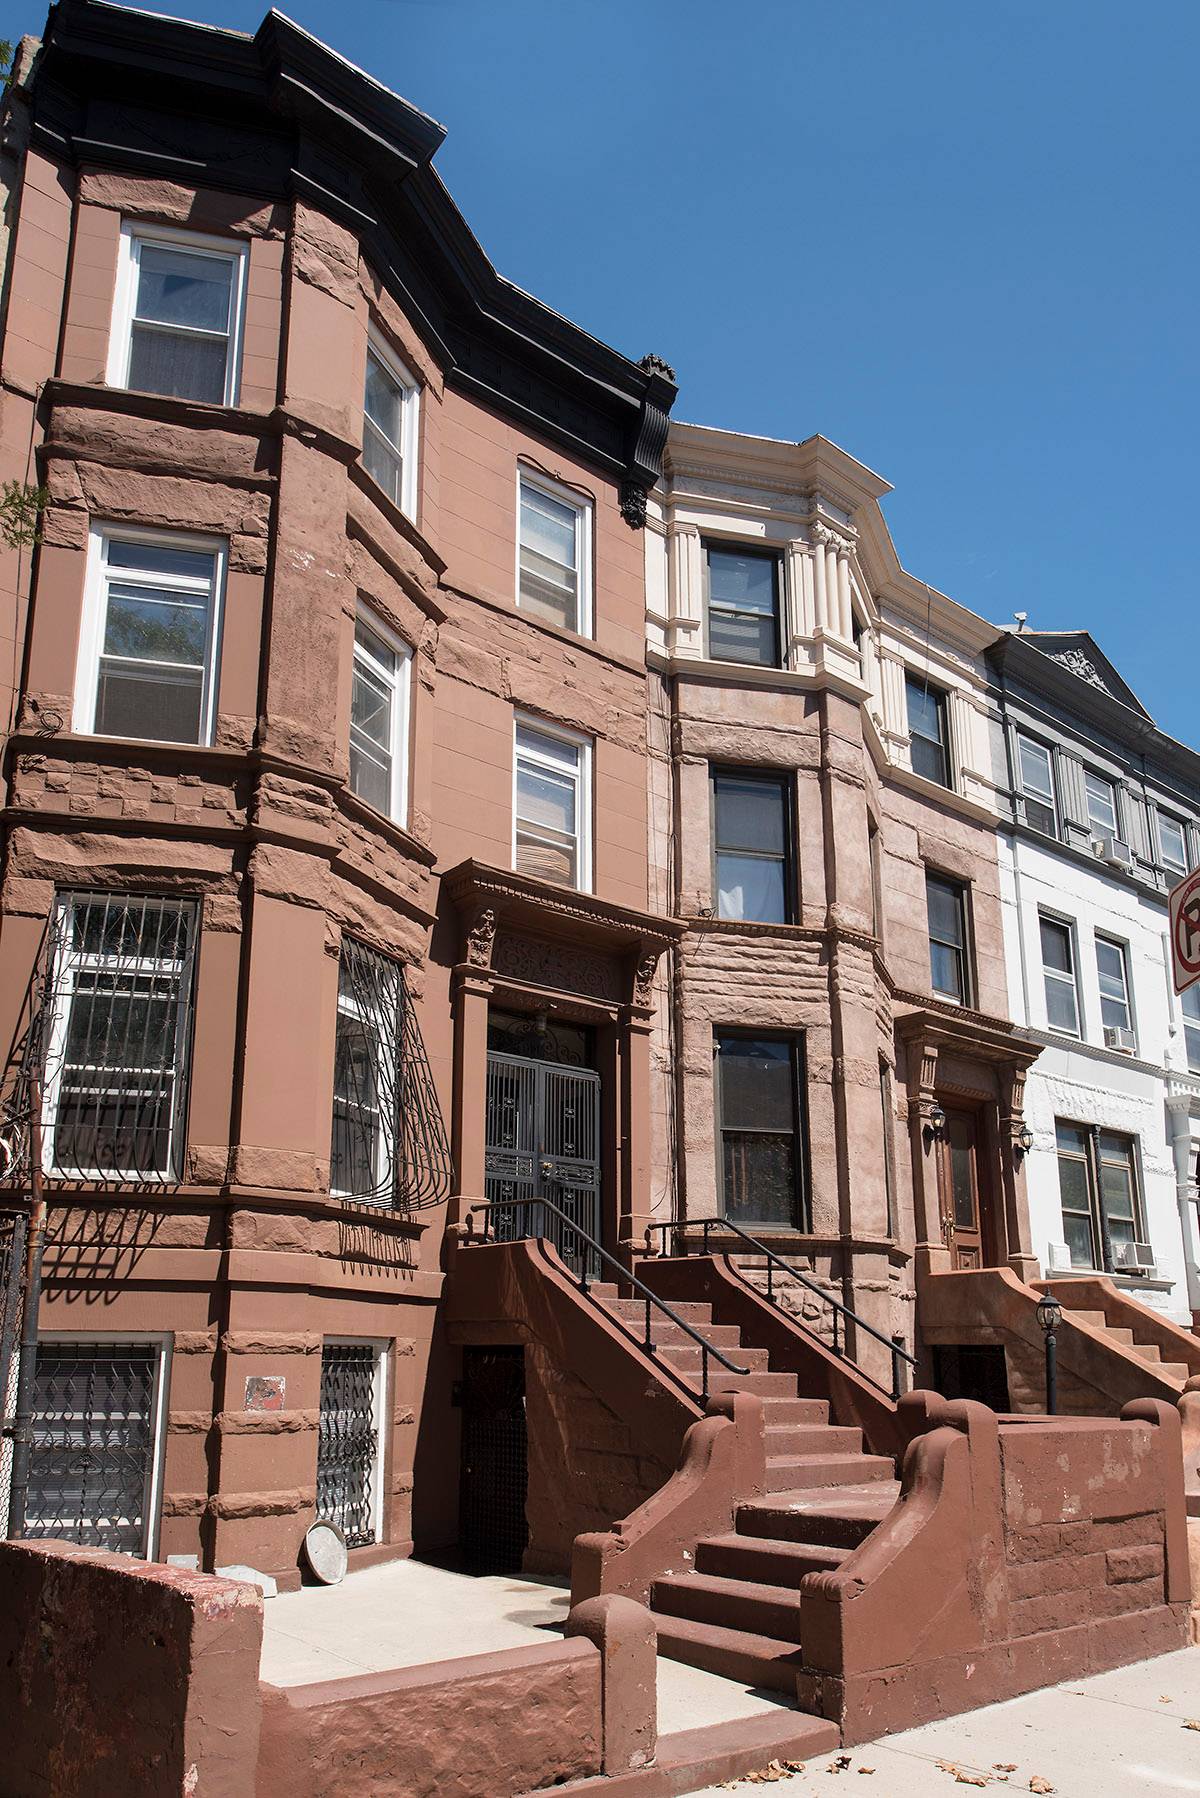 4 Story Brownstone with Original Details 